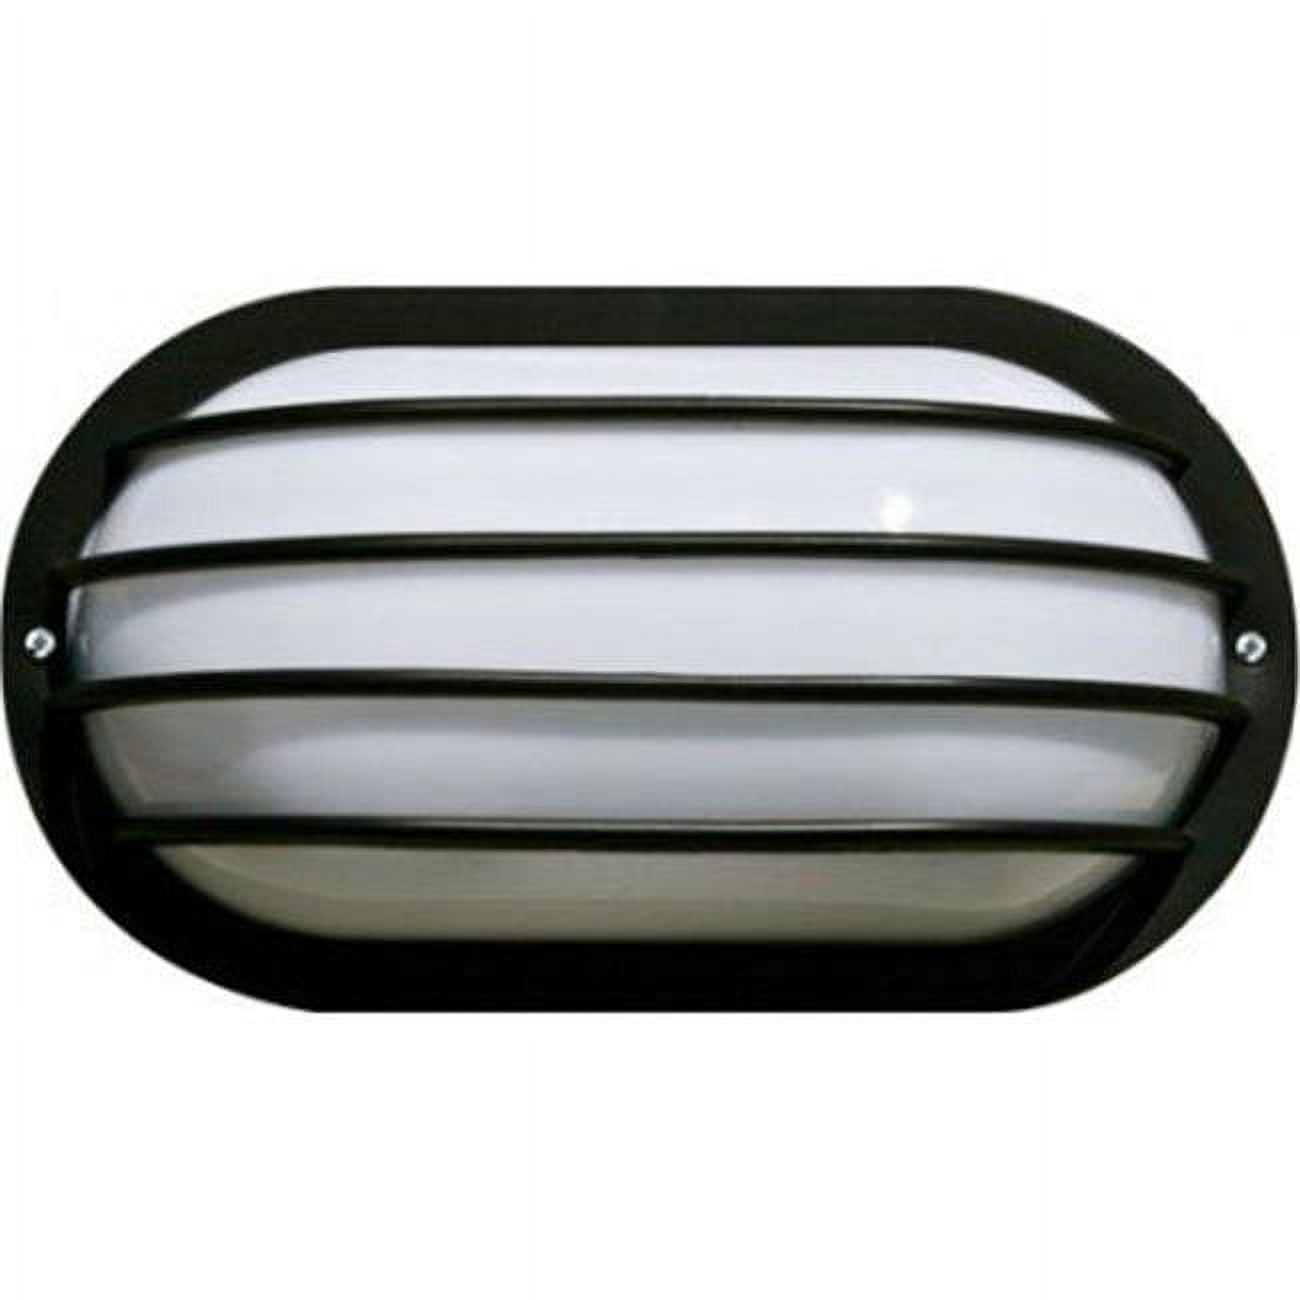 Picture of Dabmar Lighting W8400-B Oval Surface Mount Wall Fixture, Black